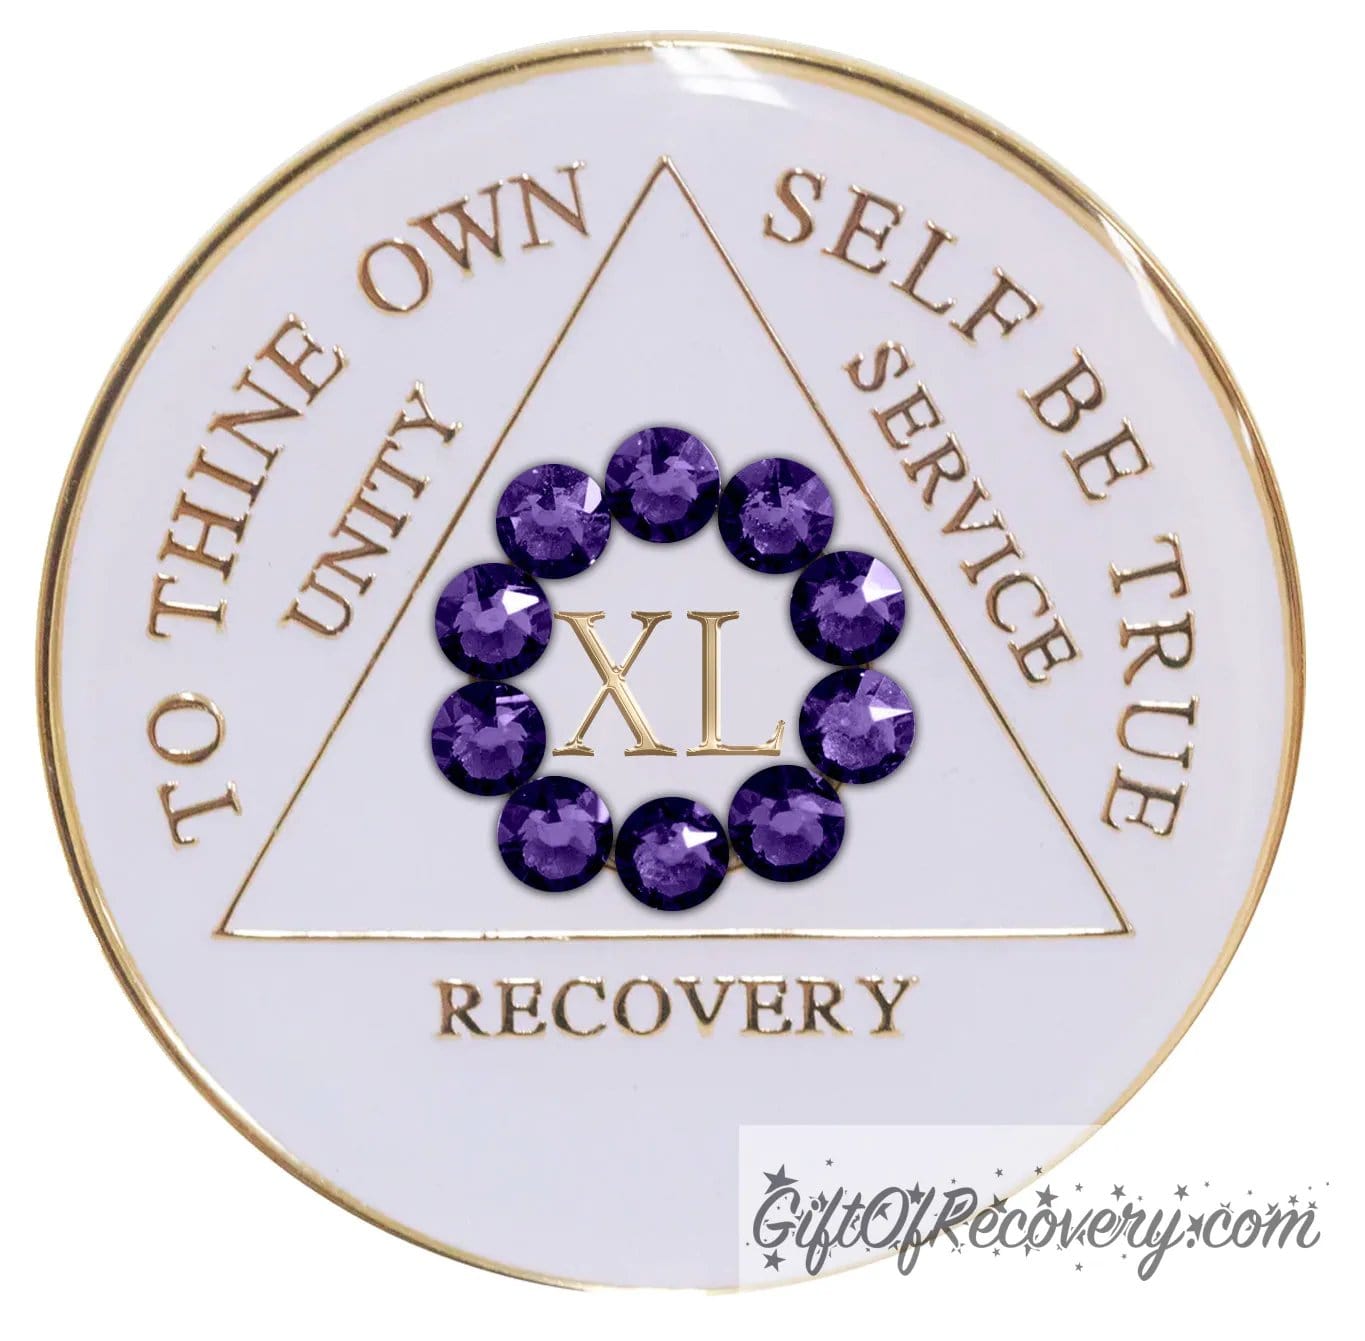 40 year AA medallion in pearl white with ten genuine purple velvet crystal in a circle representing our common welfare and personal recovery, to thine own self be true and other AA moto embossed with 14k gold-plated brass, the recovery medallion is sealed with resin for a scratch free shiny finish.